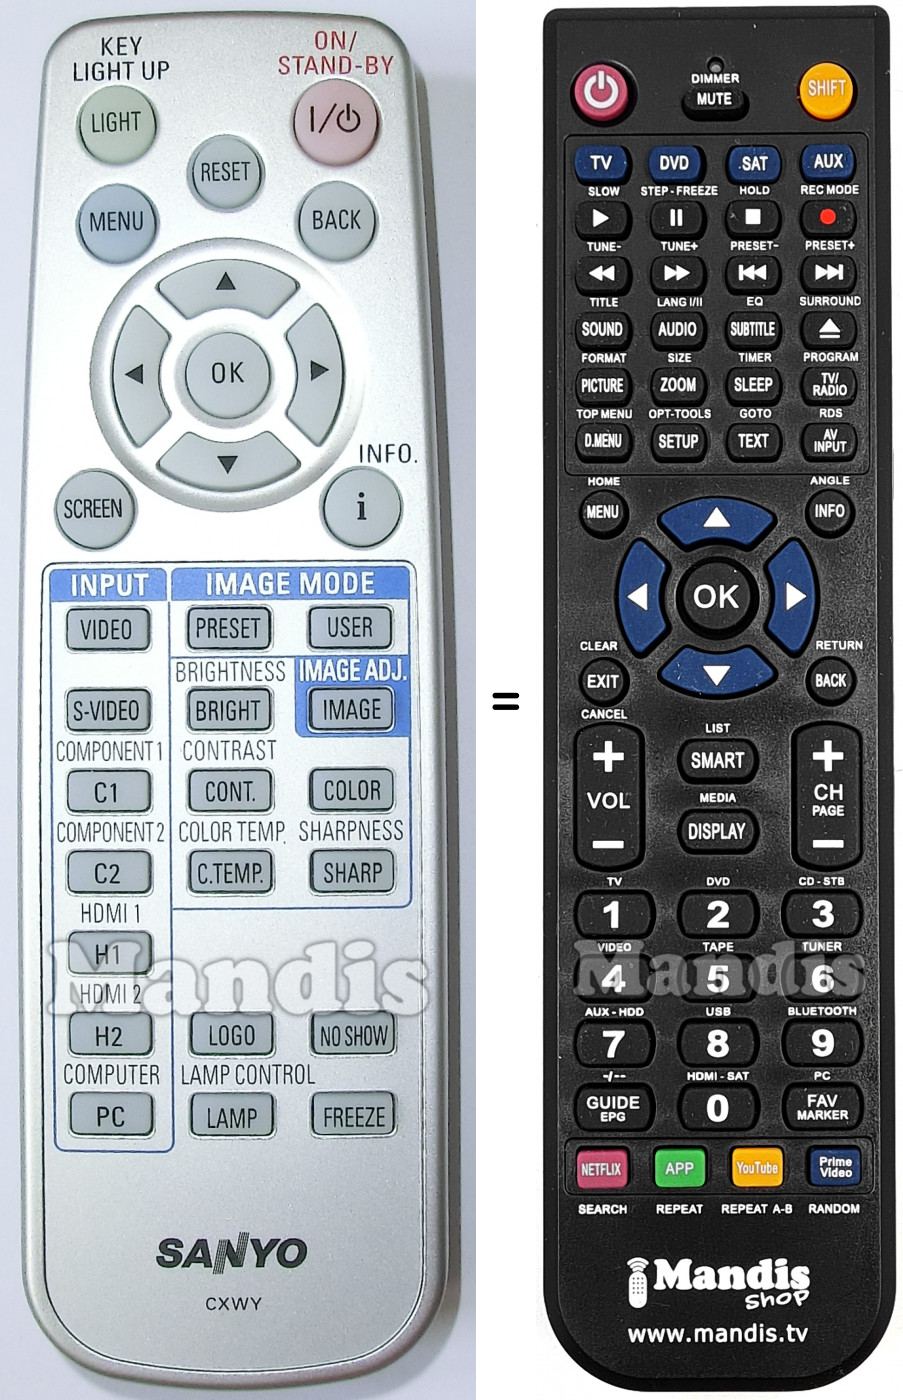 Replacement remote control Sanyo CXWY